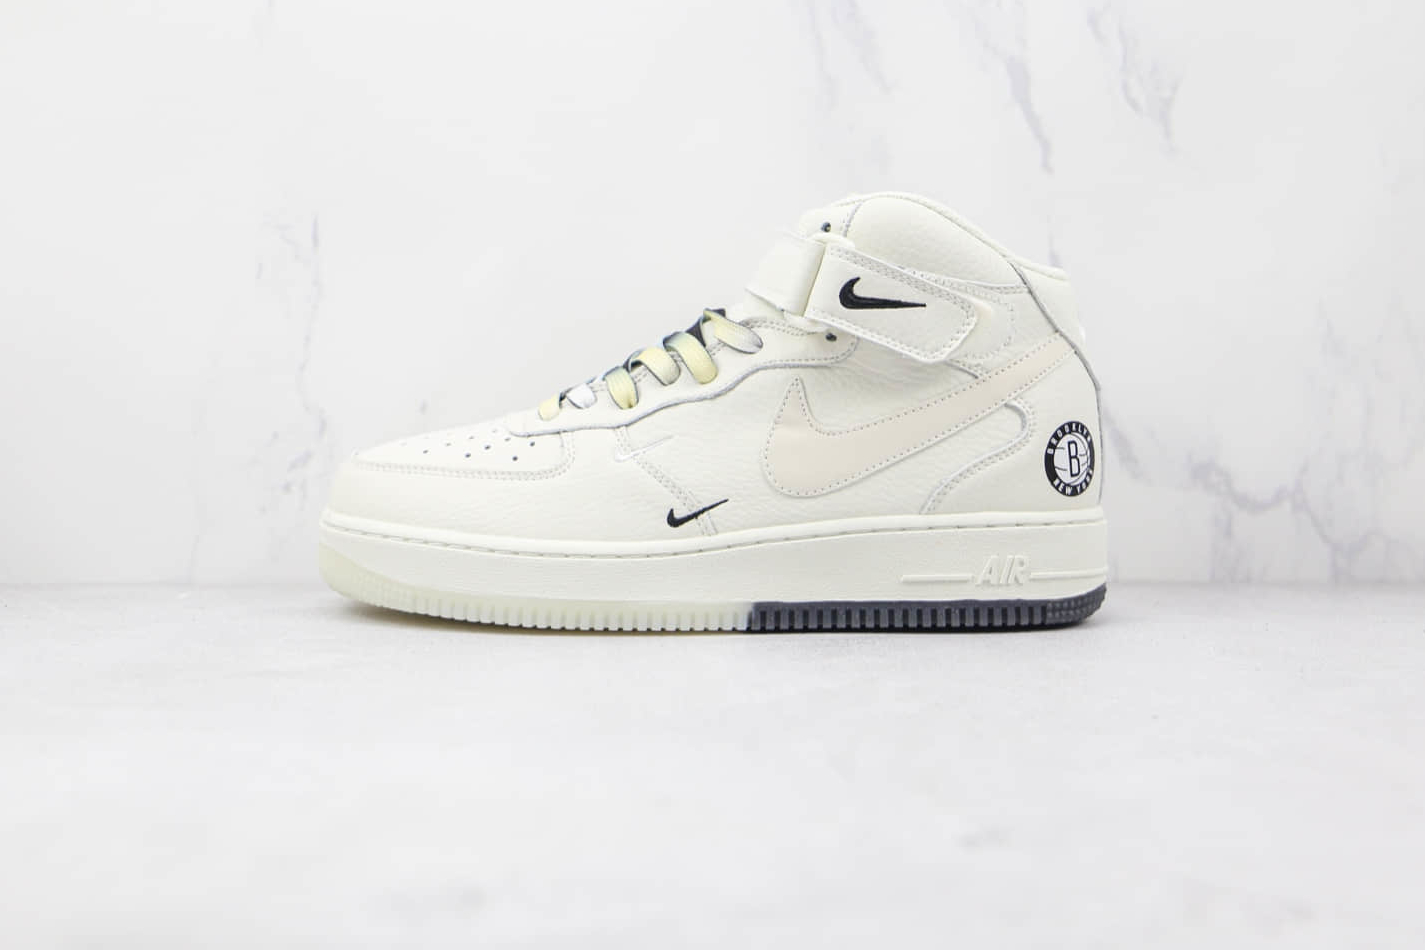 Stylish Nike Air Force 1 07 Mid White Black Yellow Shoes CT1989-117 for Ultimate Comfort